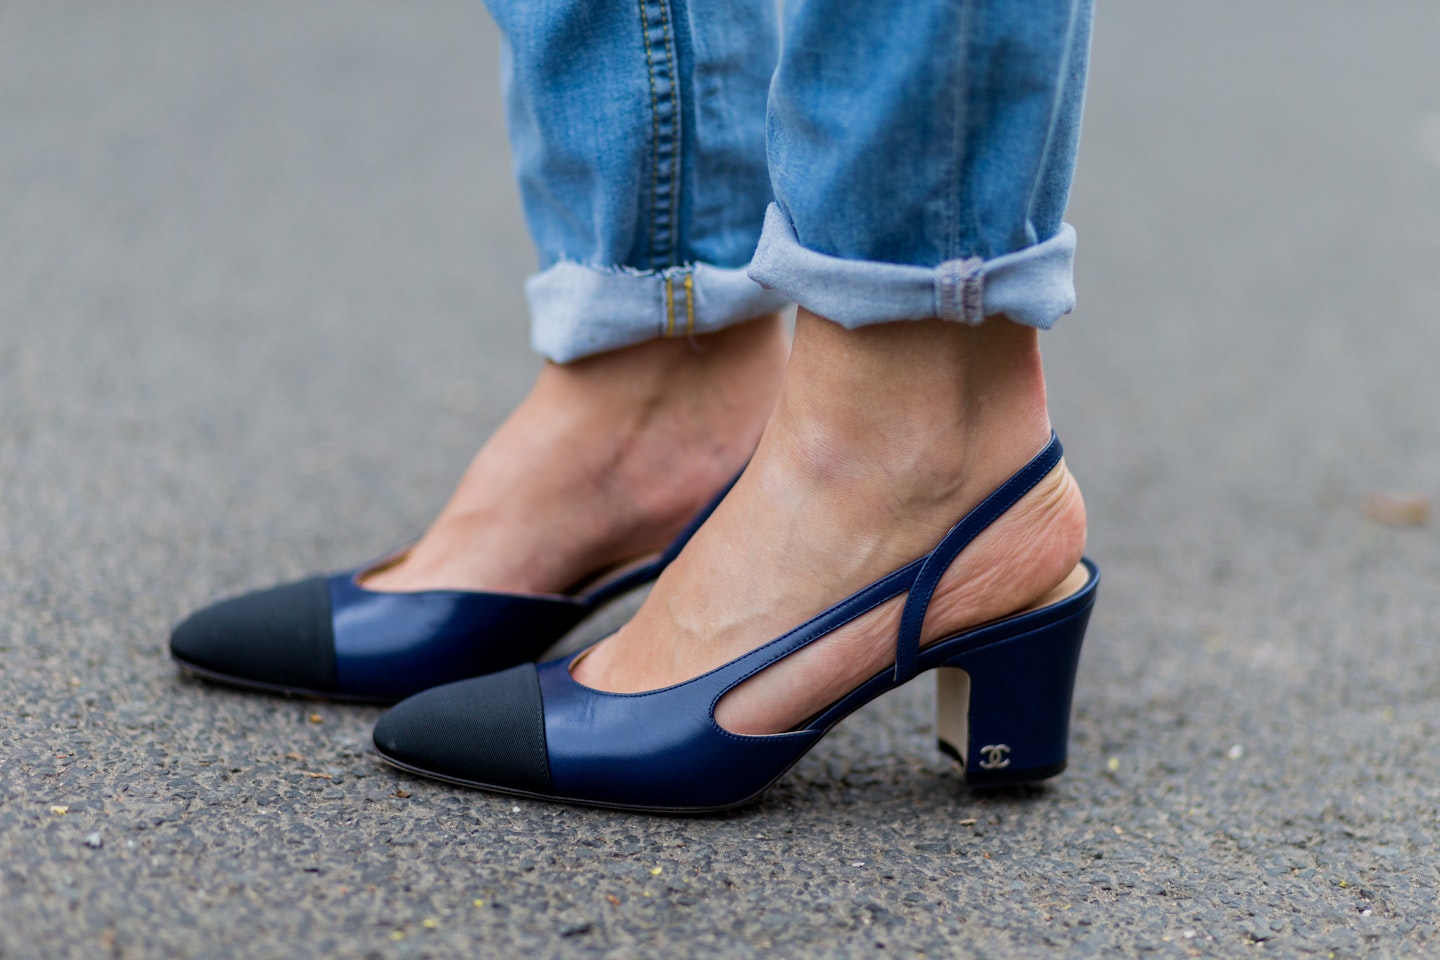 Chanel slingbacks styled with rolled up jeans